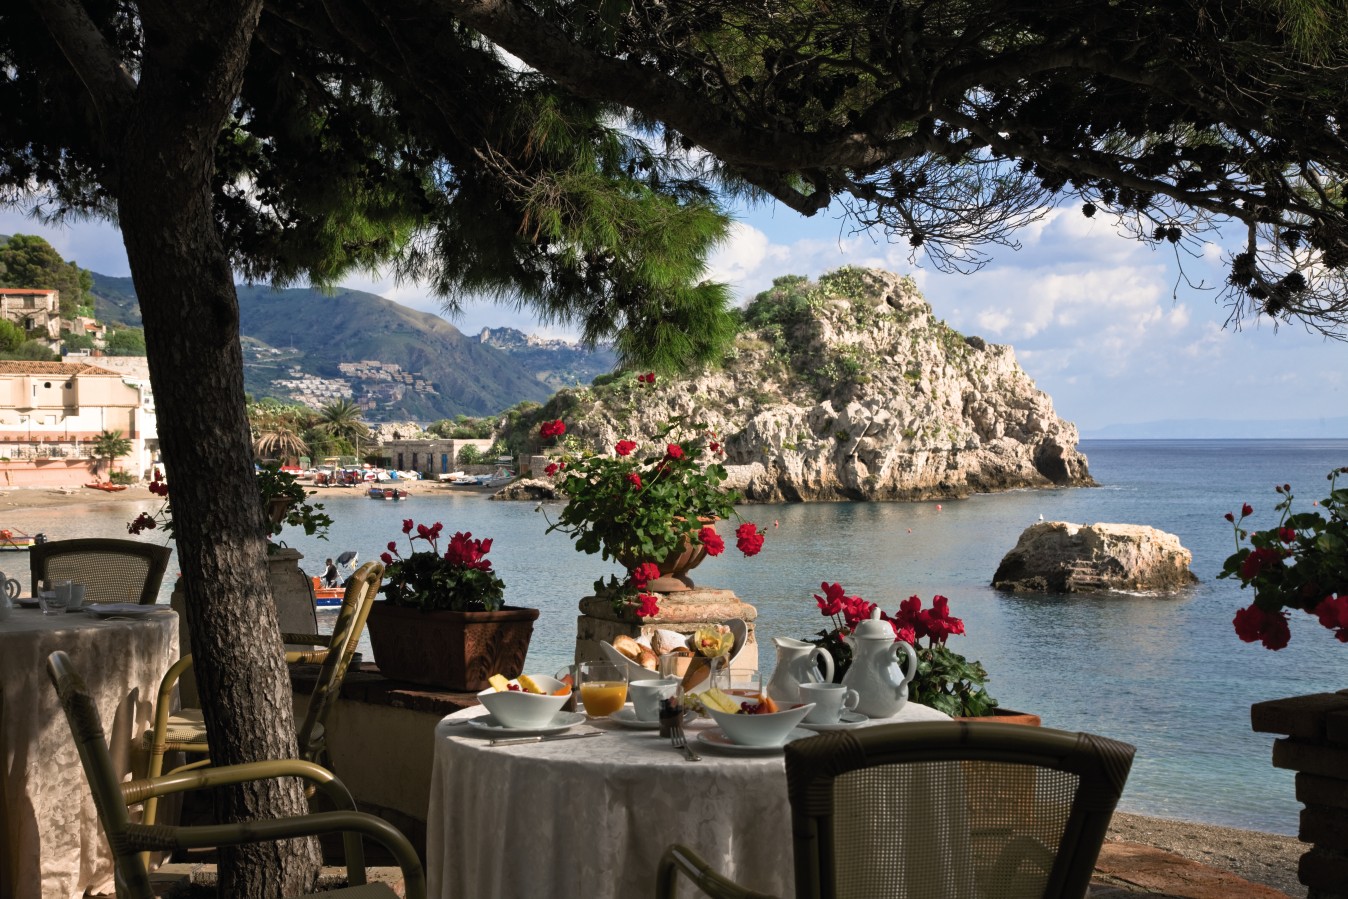 The Oliviero Restaurant, at the Belmond Villa Sant’Andrea, is famous for its seafood specialties. The hotel enjoys a prime slice of Sicilian real estate.